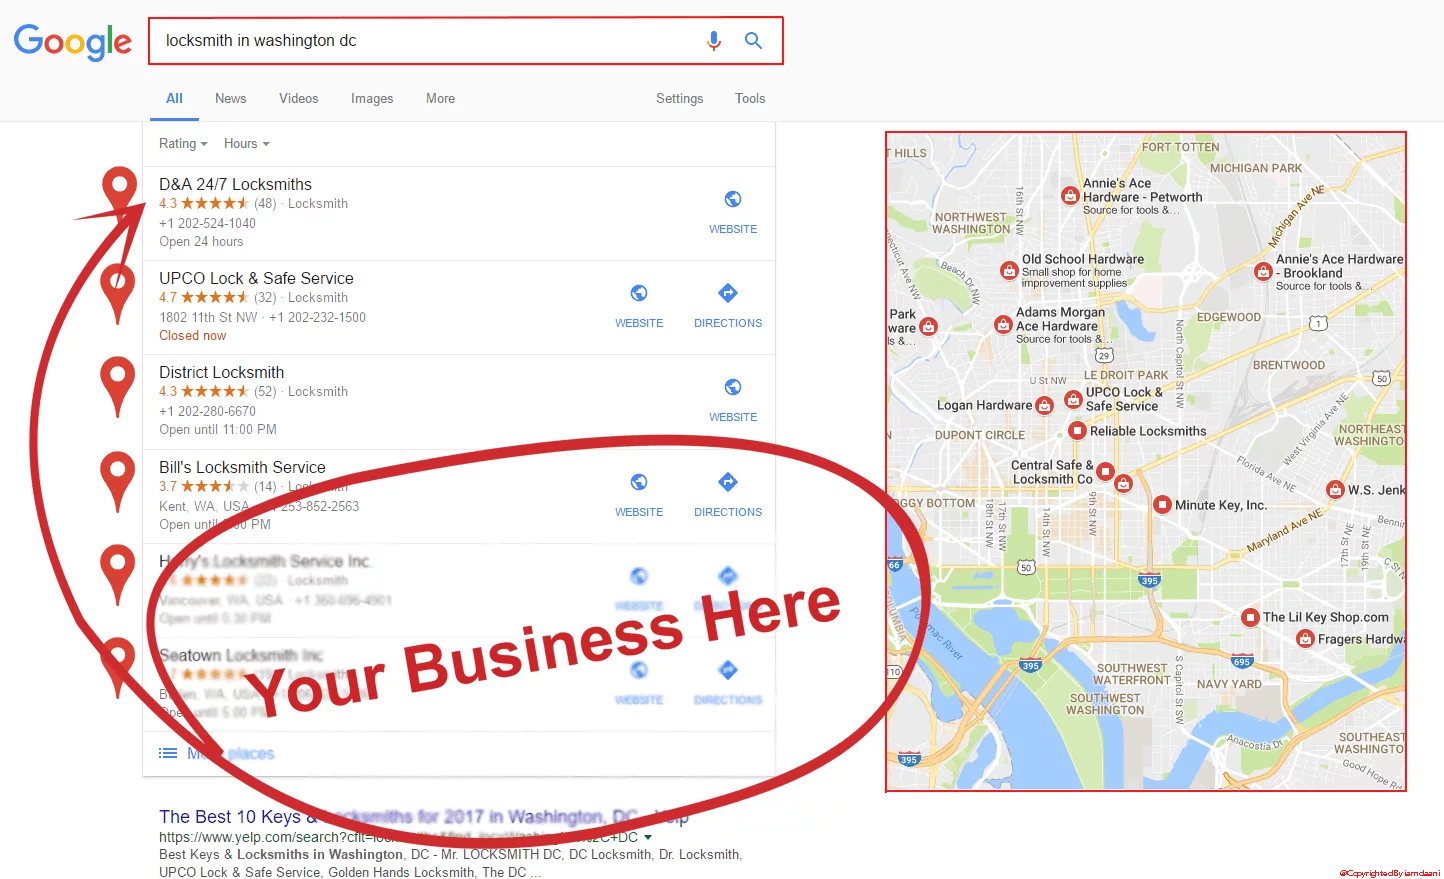 What is SEO optimization for Google Maps?